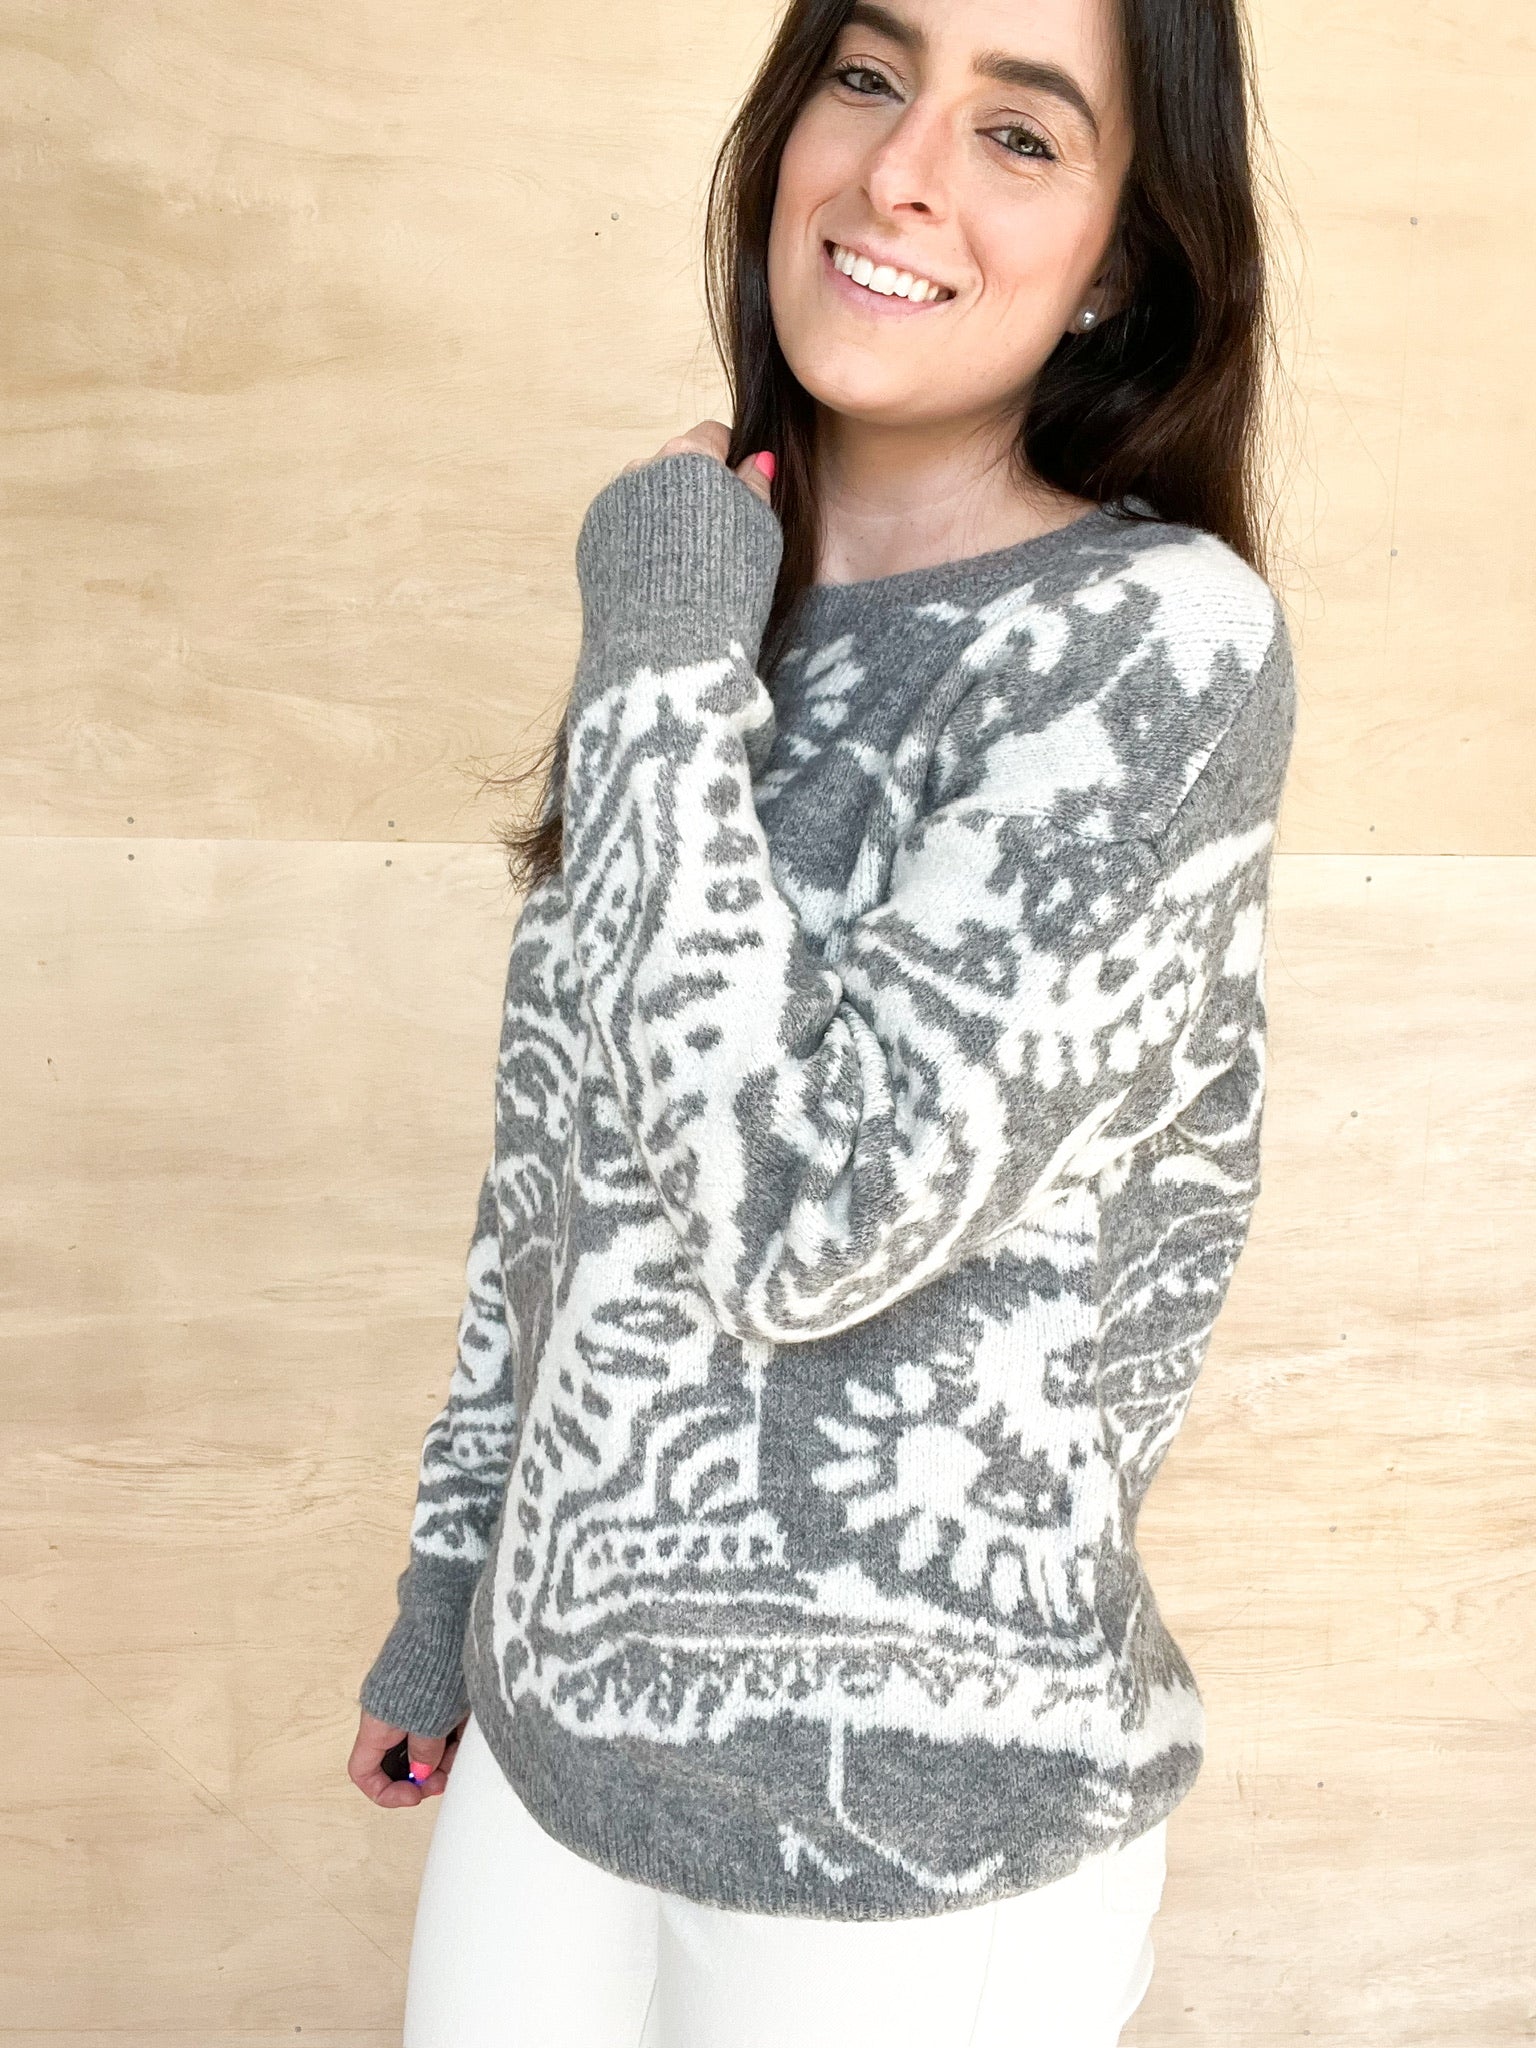 Grey sweater with white paisley detail on the entire sweater, round neckline, relaxed fit in the body, full length